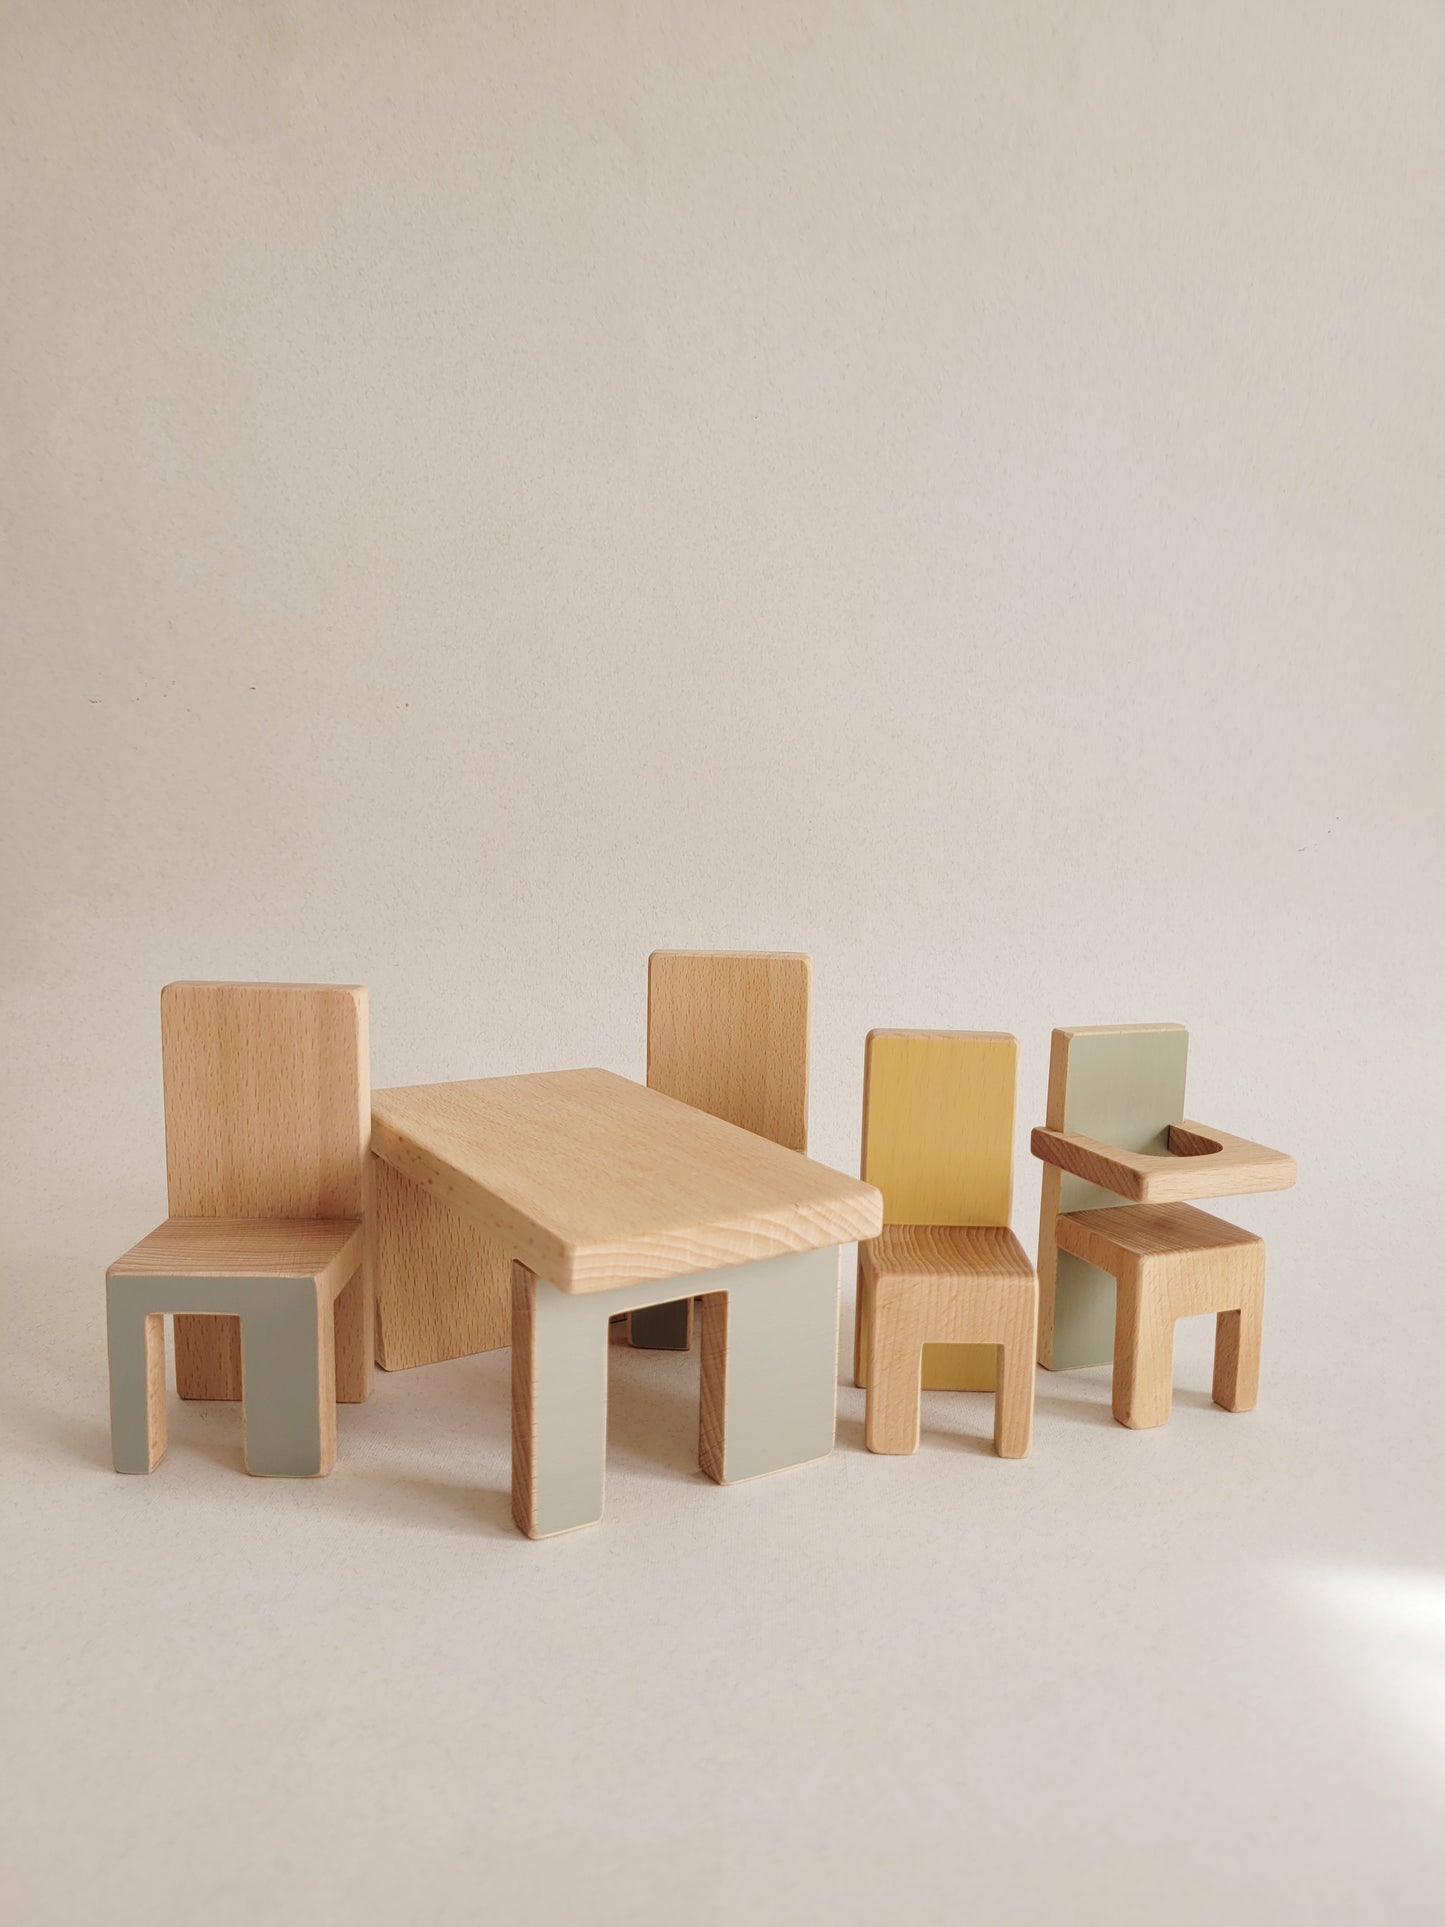 At the table play set - Exclusive collaboration for A Greener Wood